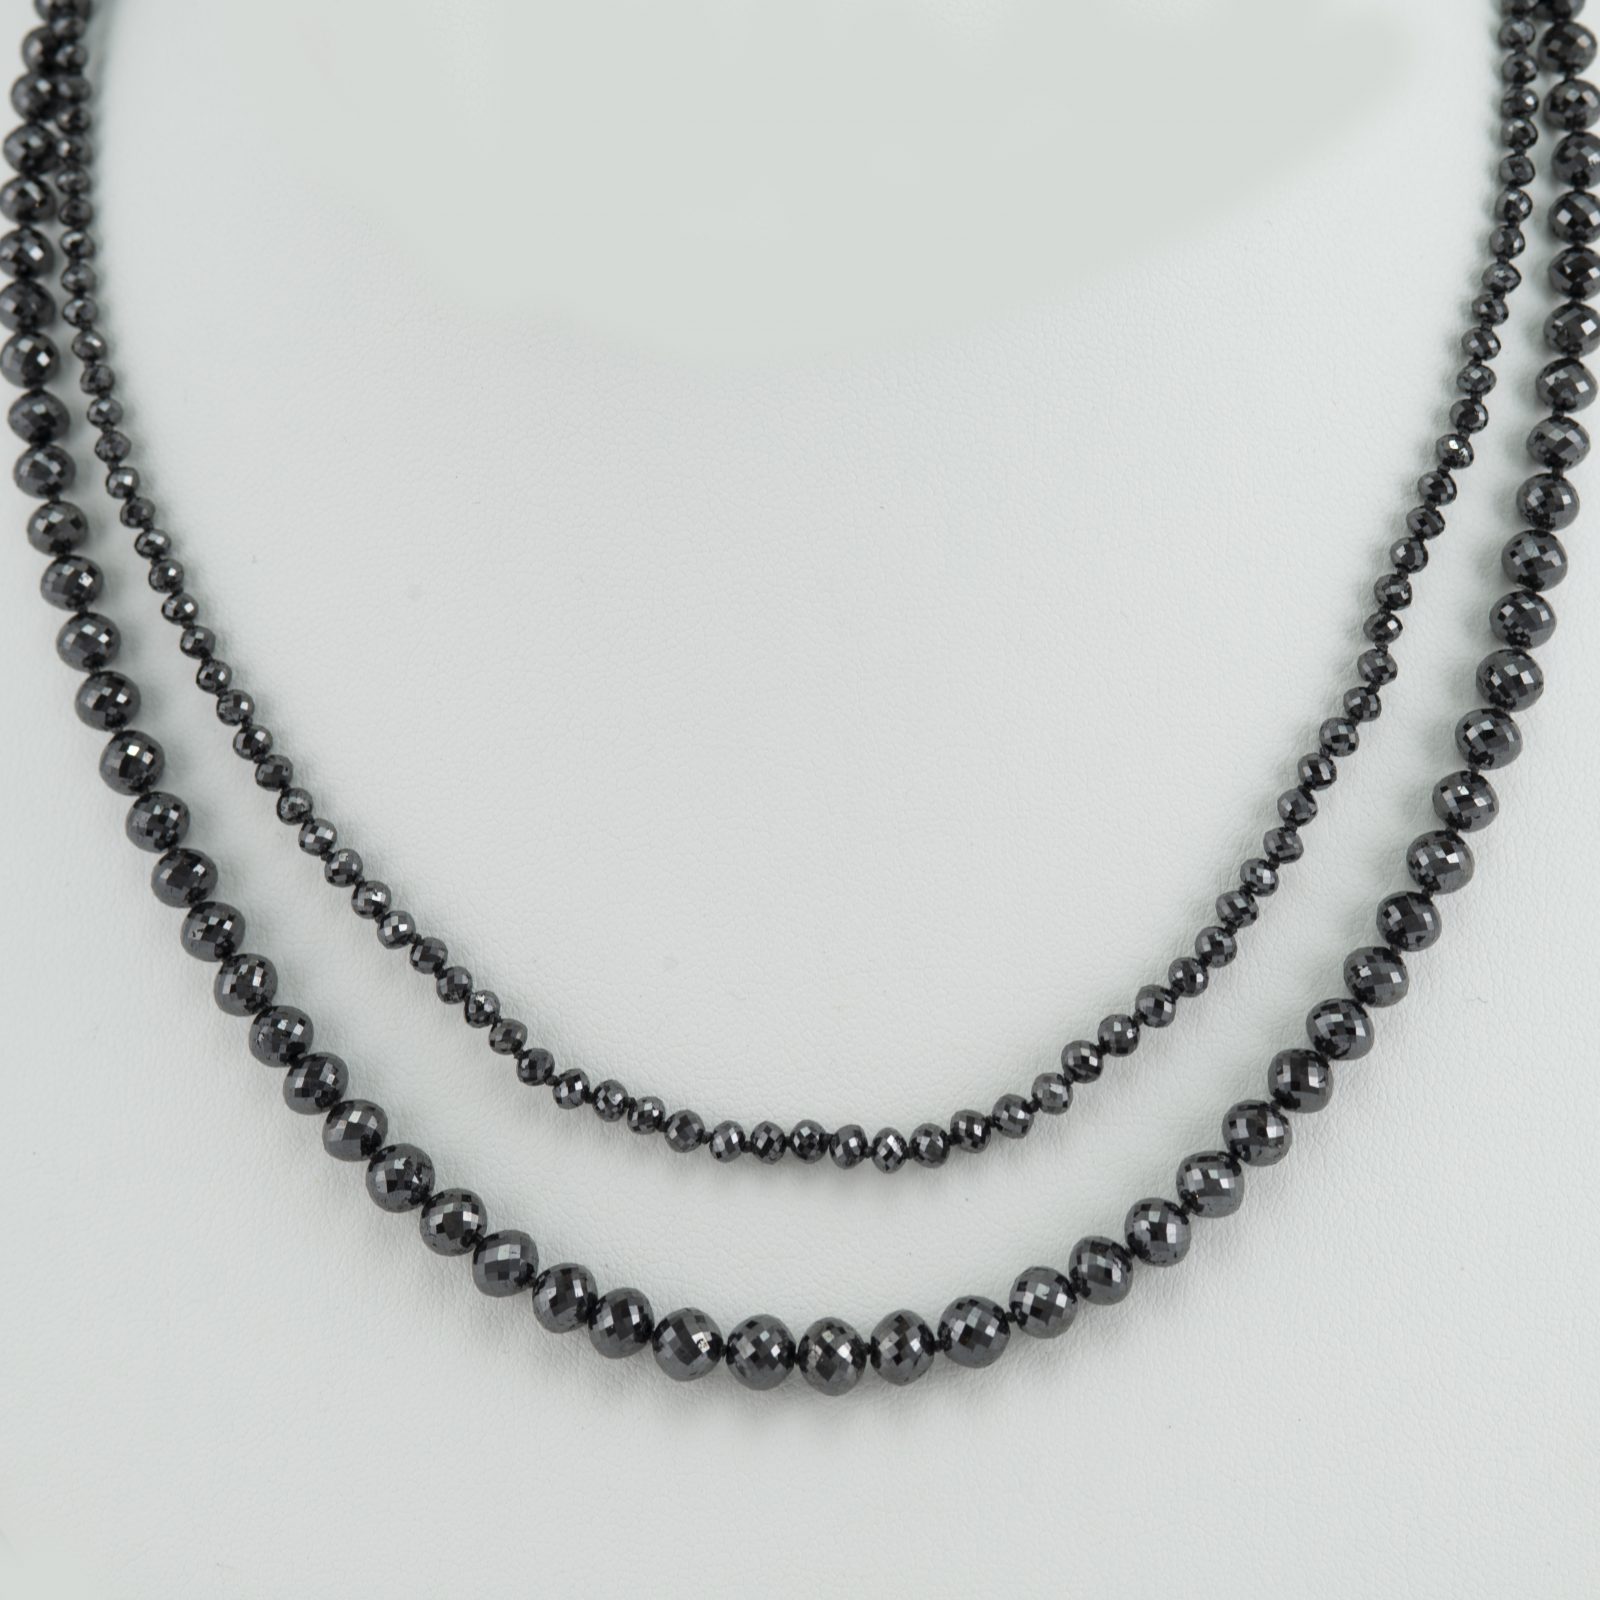 Black diamond necklaces with 14kt white or yellow gold clasp